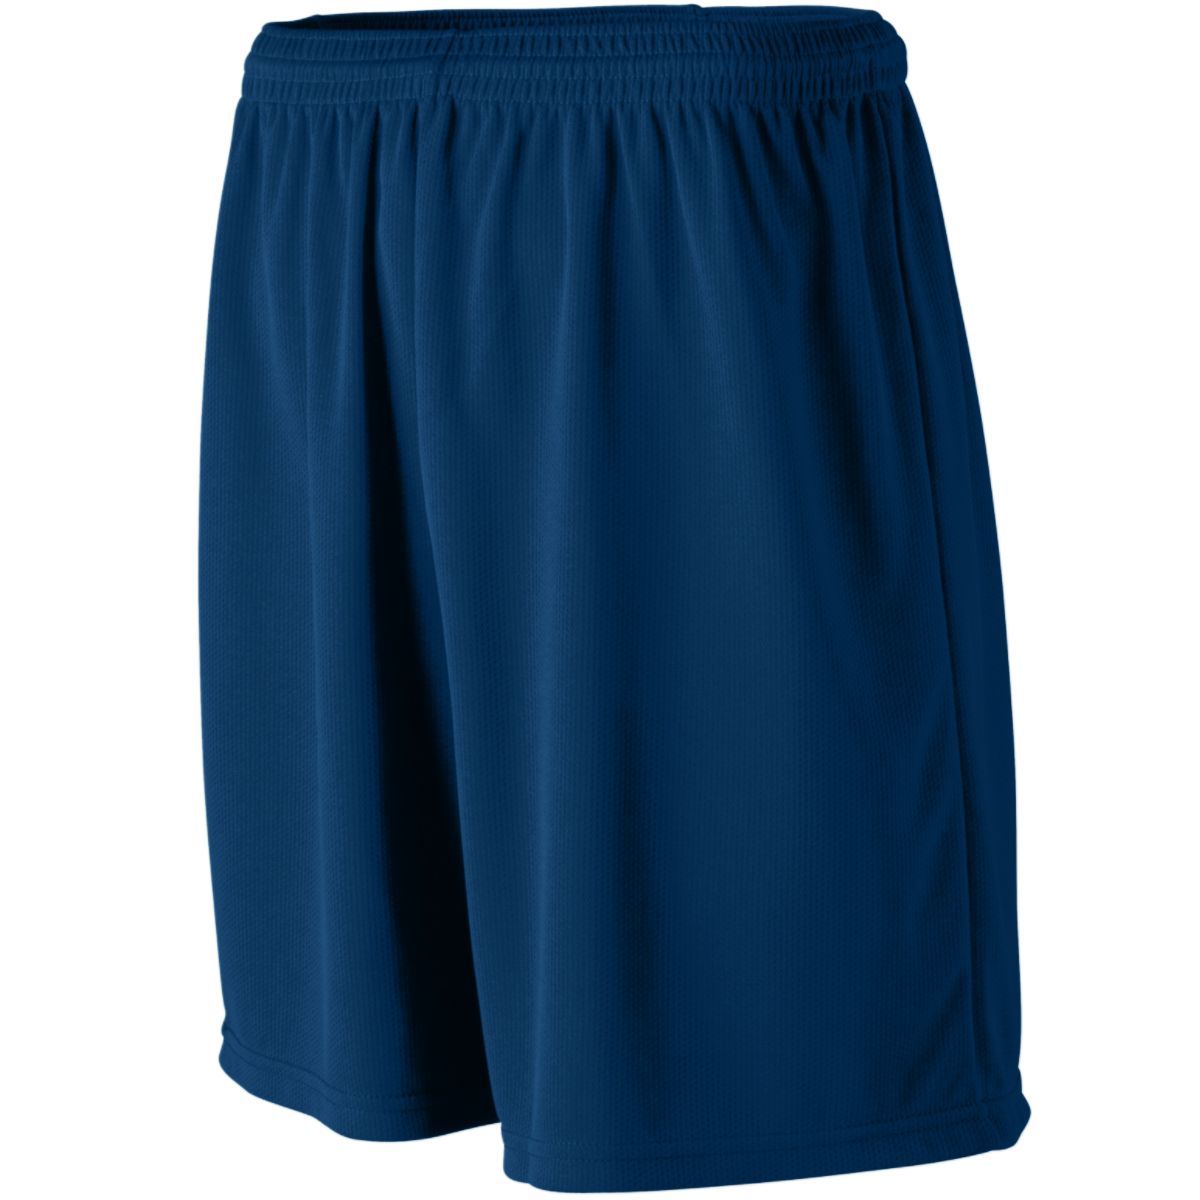 Augusta Sportswear Wicking Mesh Athletic Shorts in Navy  -Part of the Adult, Adult-Shorts, Augusta-Products product lines at KanaleyCreations.com